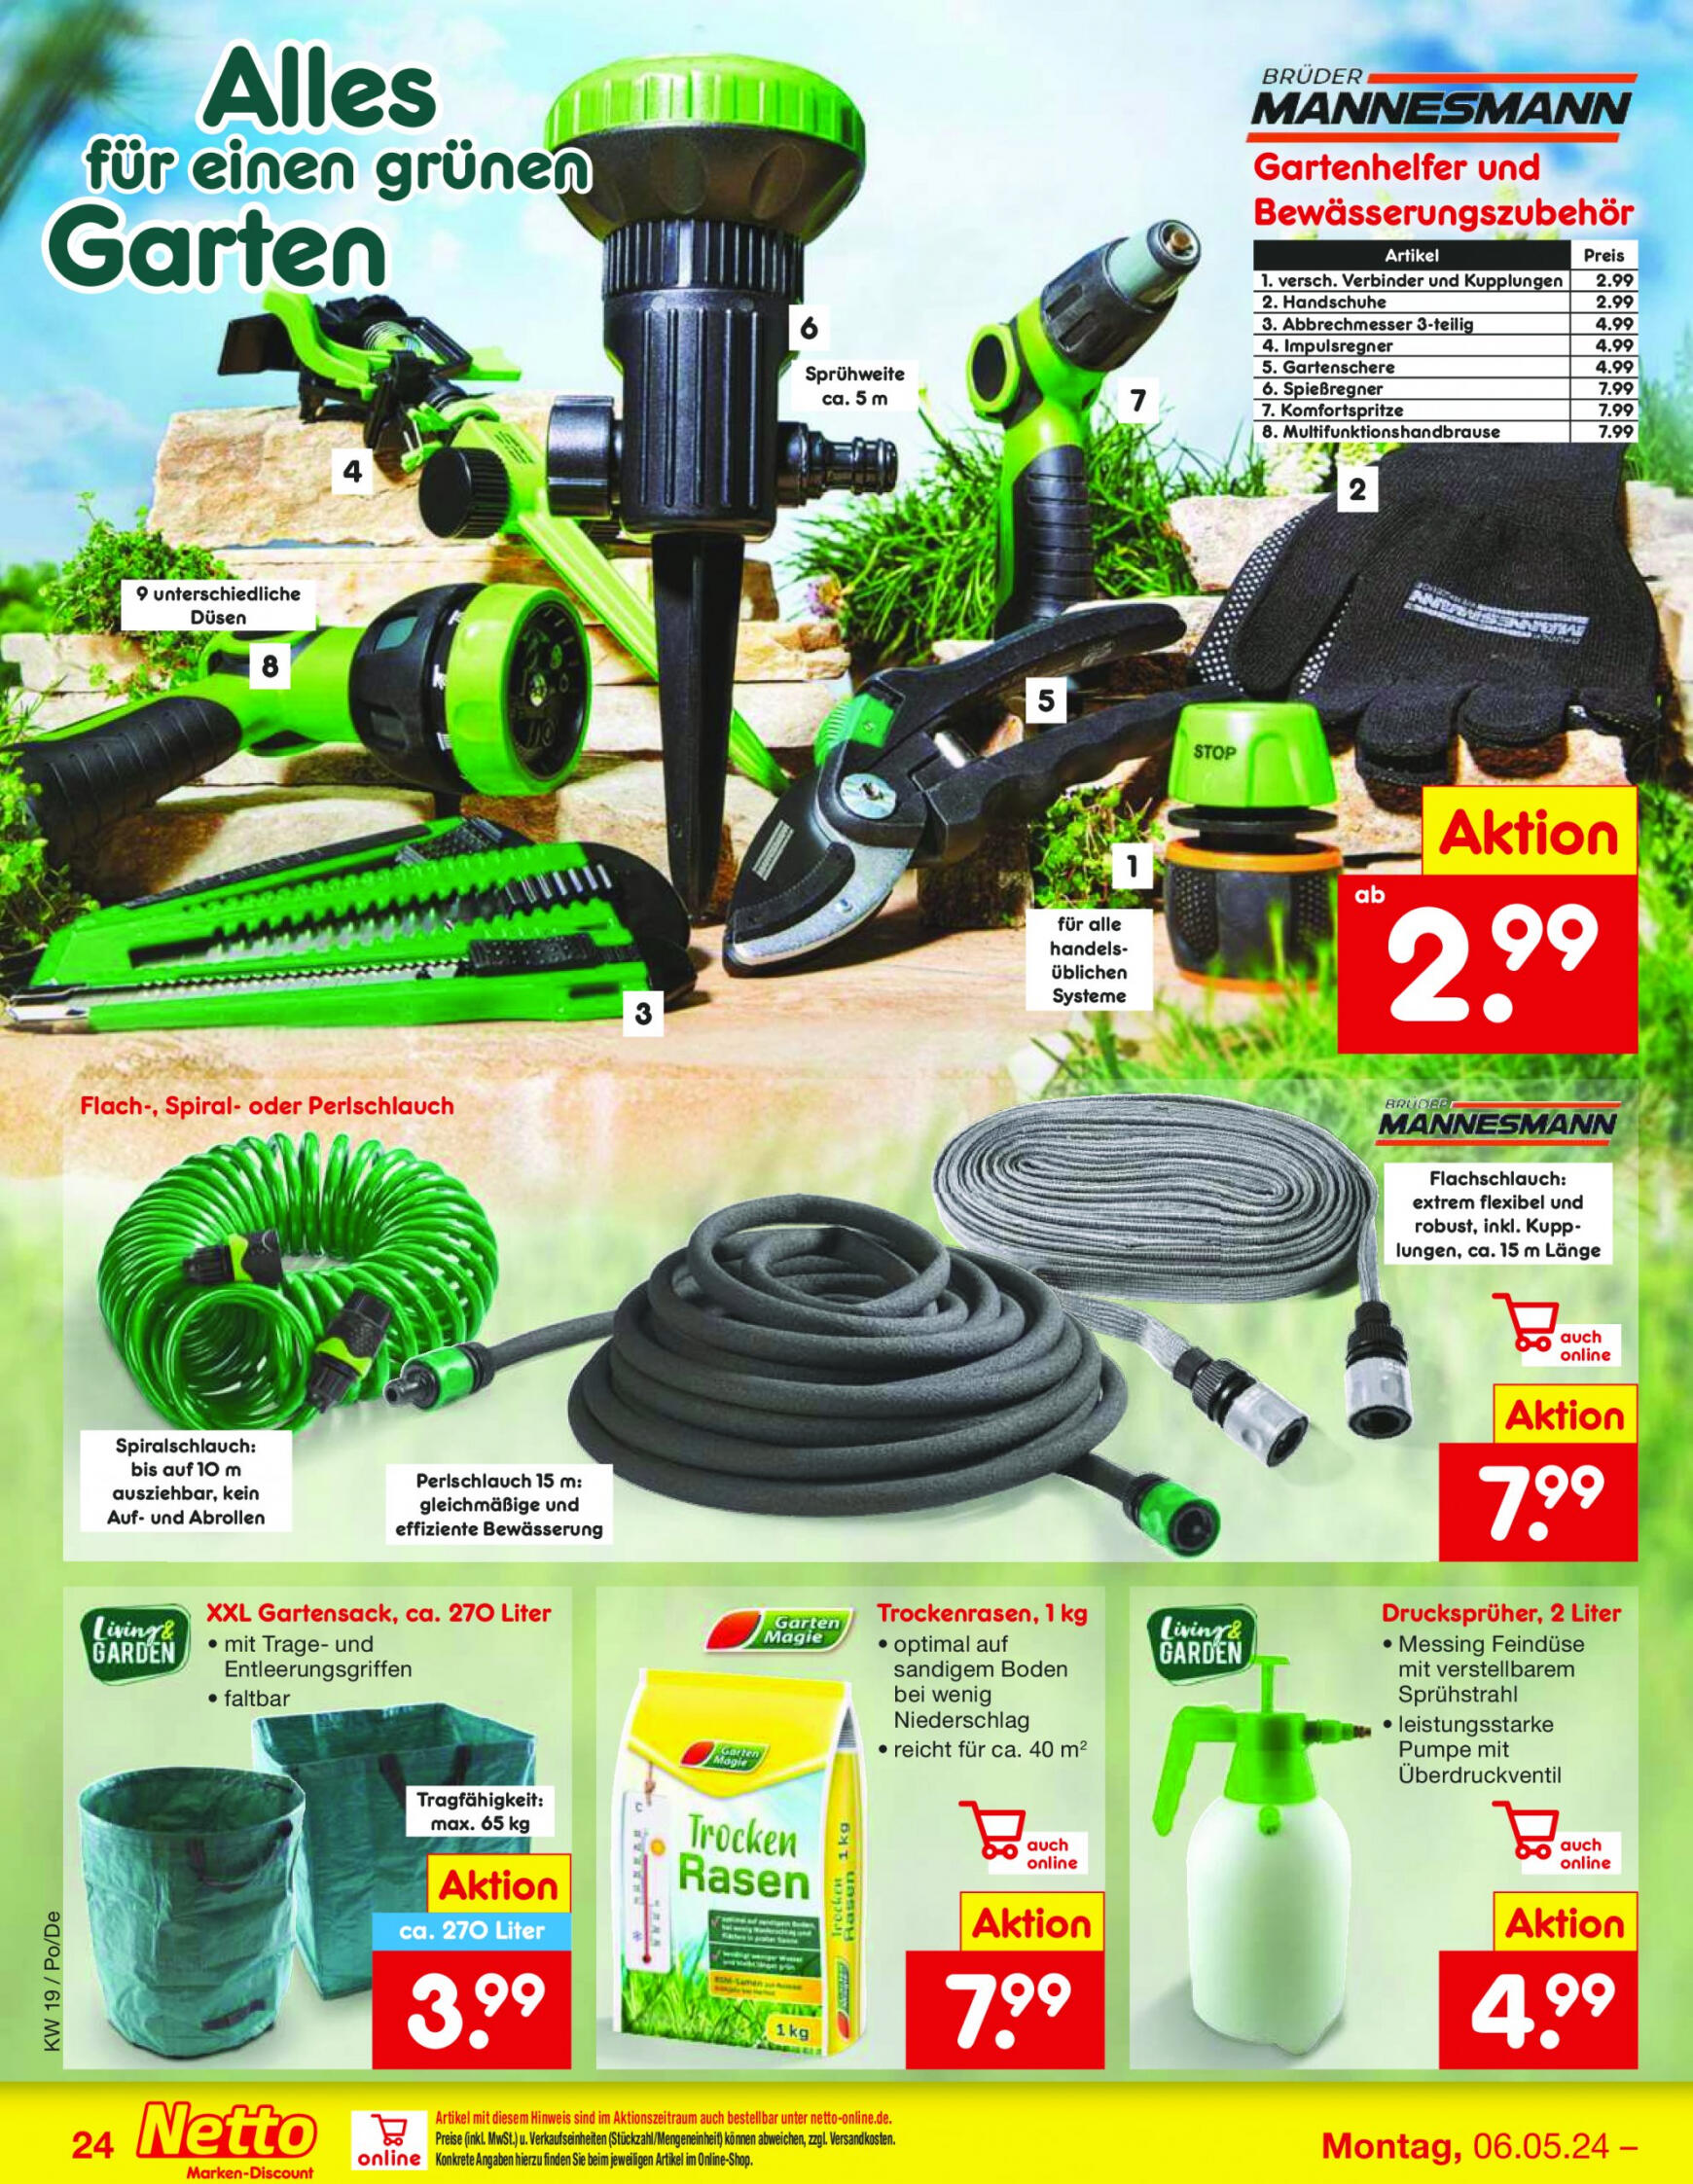 netto - Flyer Netto aktuell 06.05. - 11.05. - page: 32